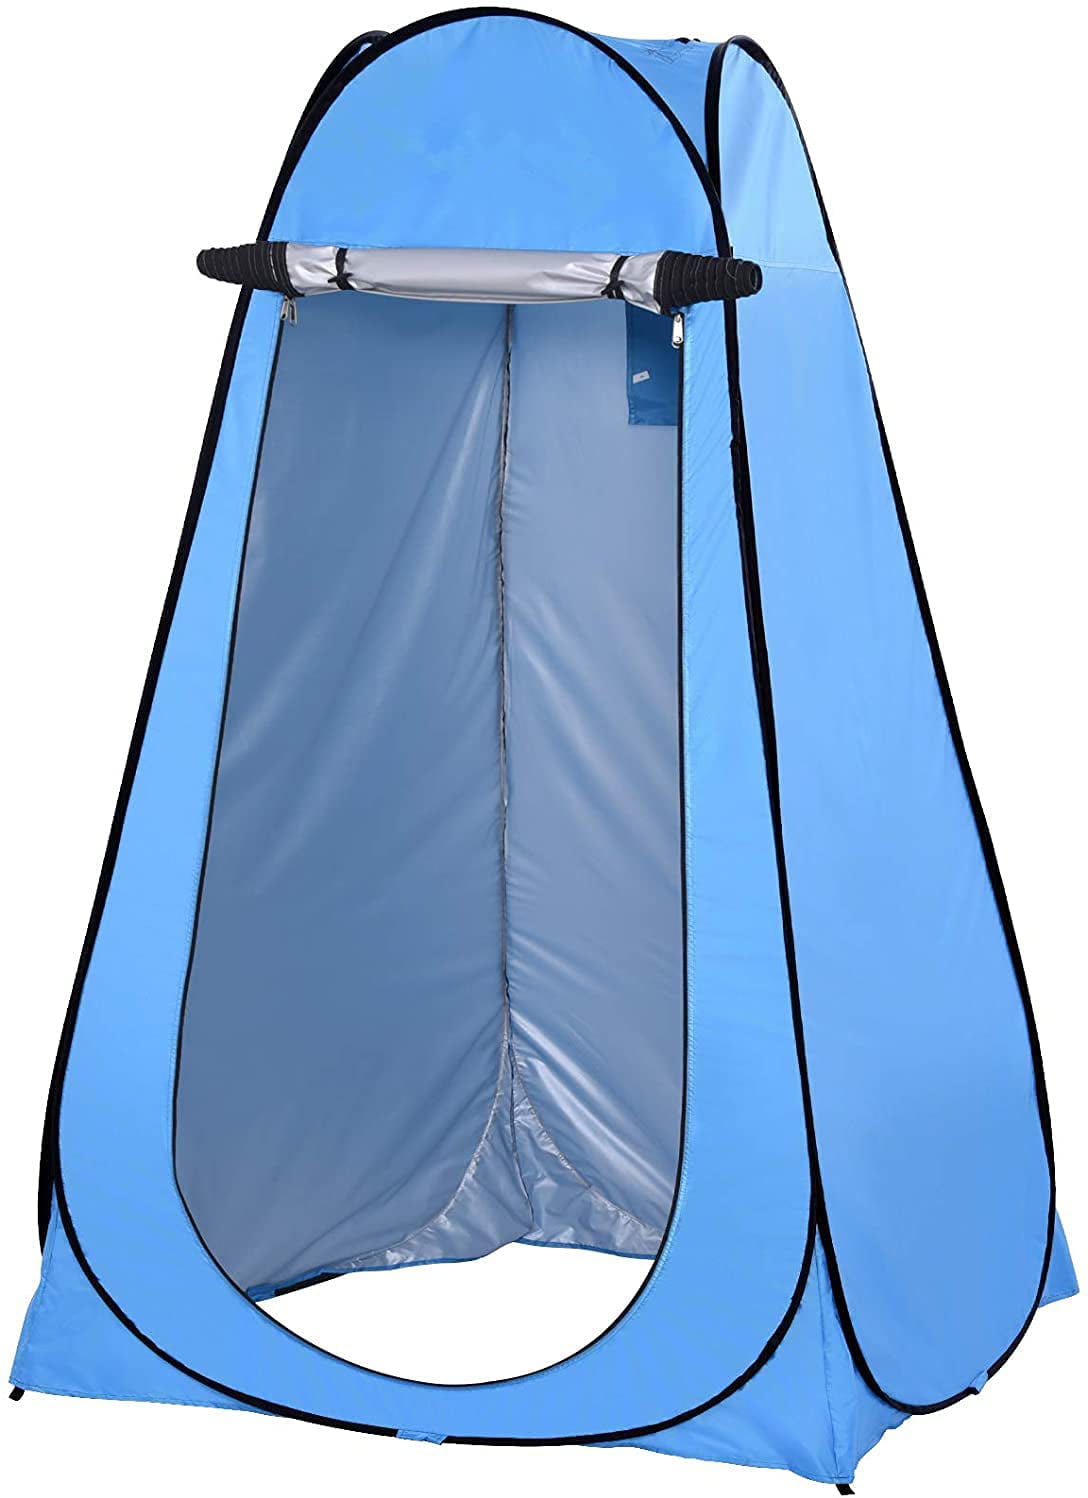 Portable Pop up Changing Tent,Instant Privacy Outdoor Portable Changing Tent Rain Shelter Camp Toilet for Camping & Beach with Carry Bag. 